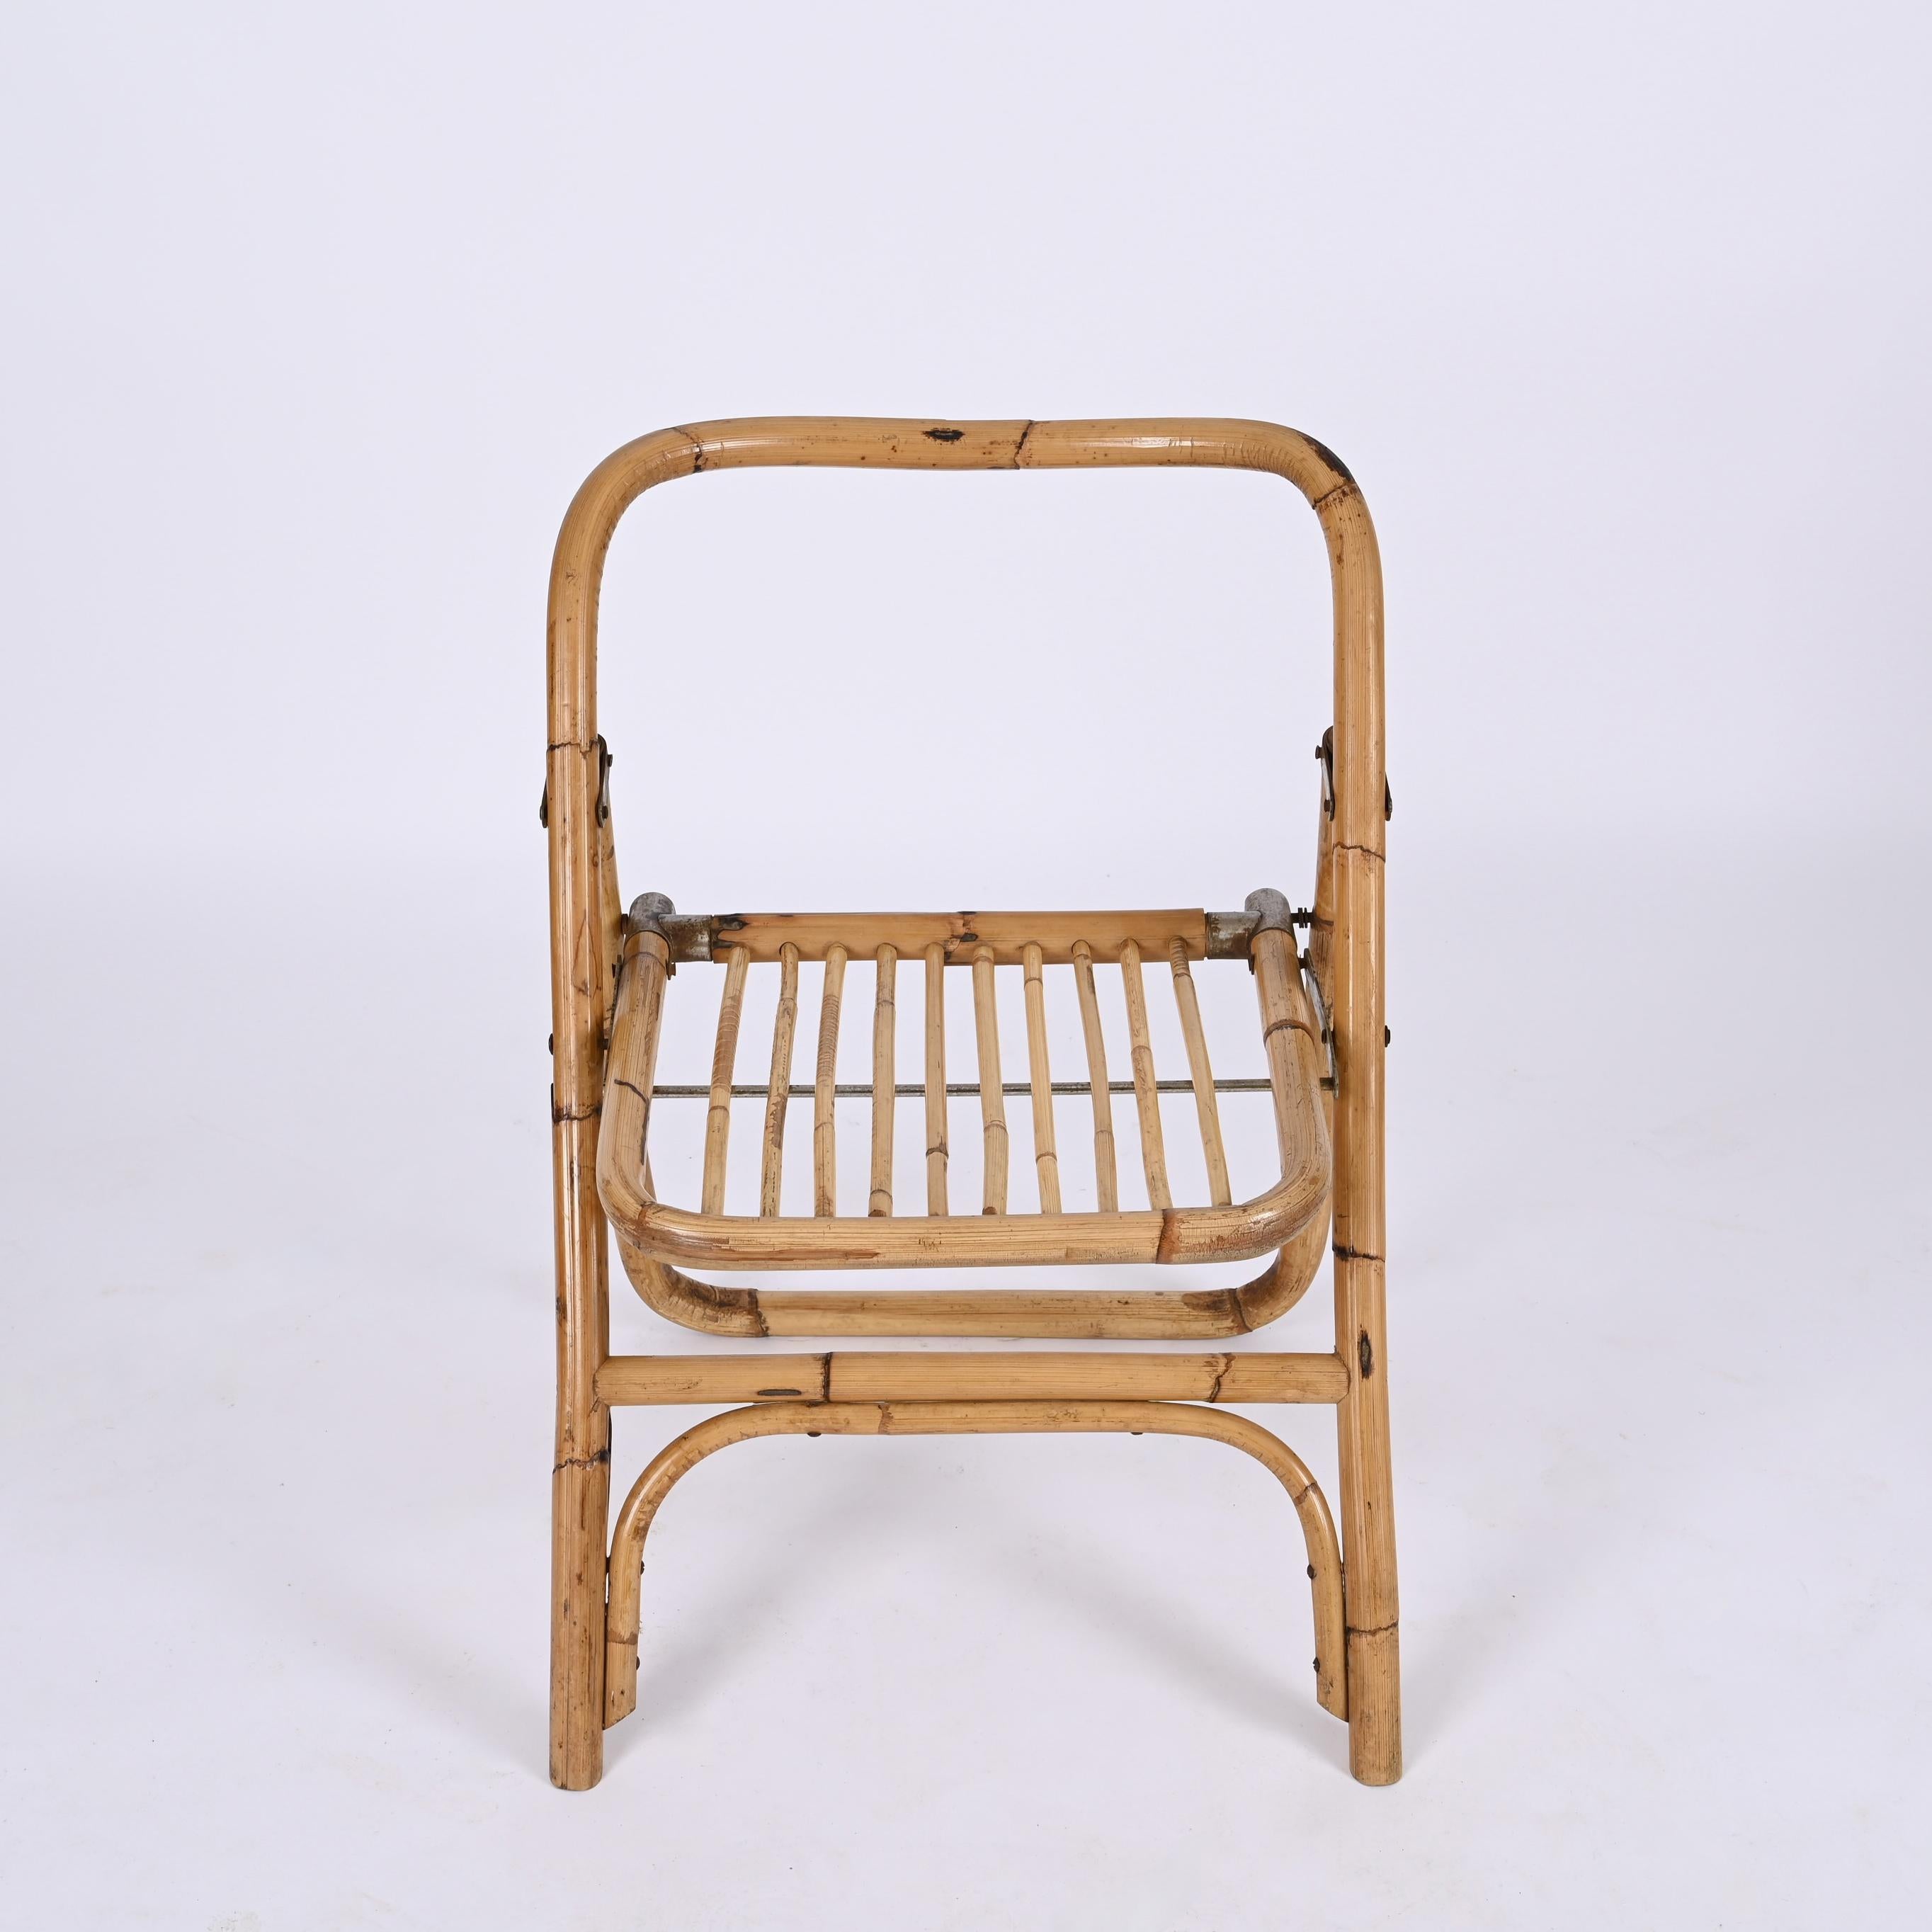 Dal Vera Bamboo Folding Chairs, Italy, 1960s For Sale 4